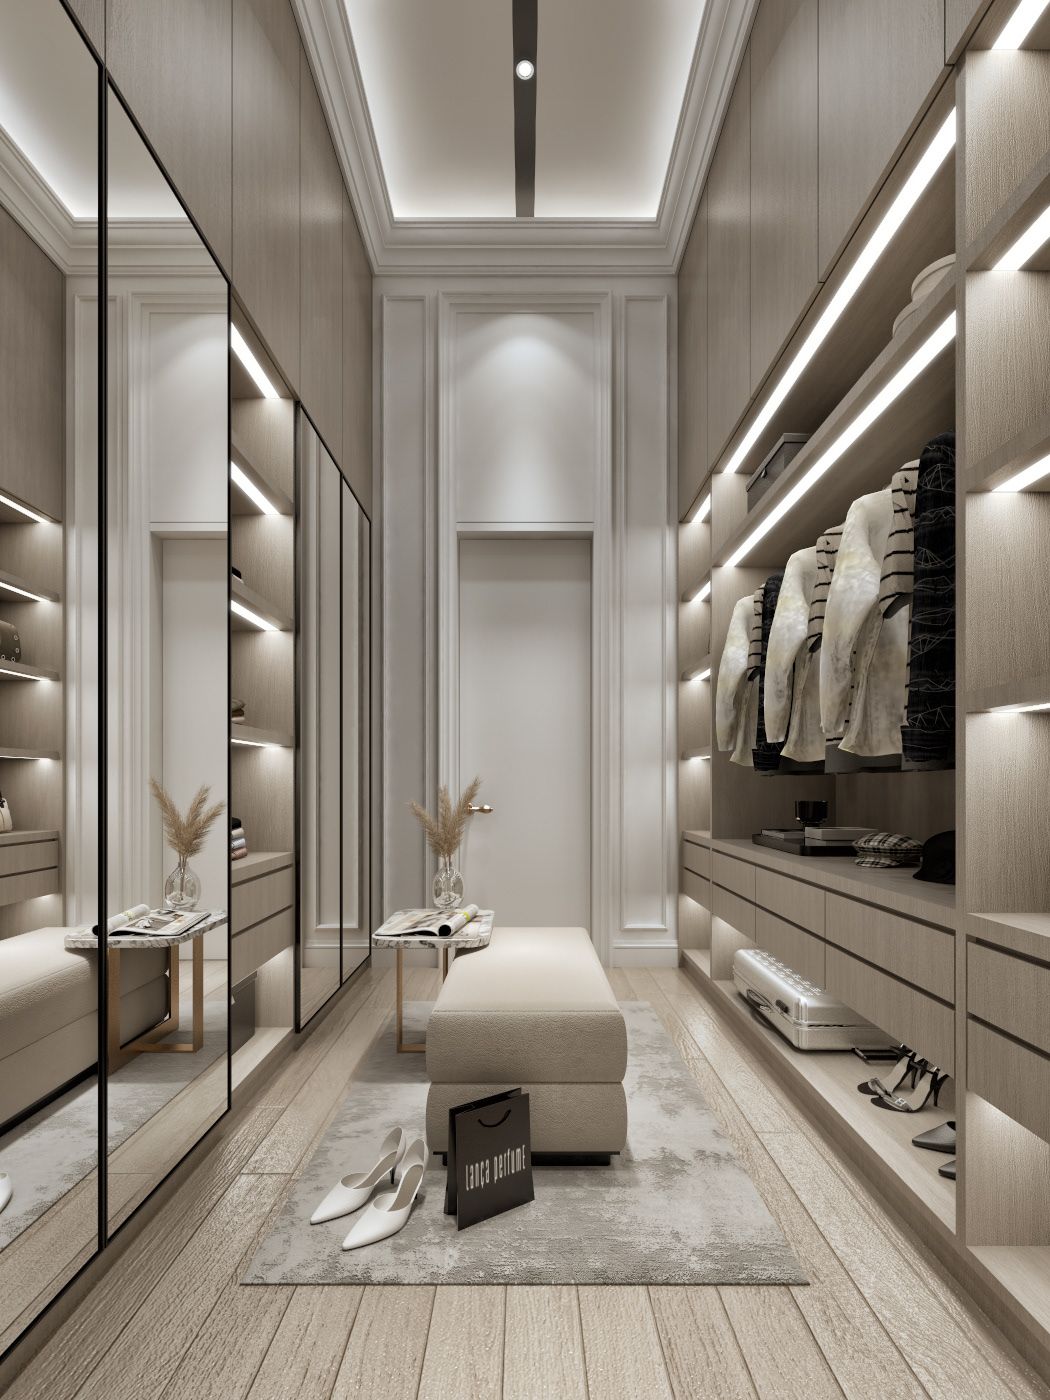 Luxury and Functionality: Designing a
Walk-in Wardrobe That Fits Your Style